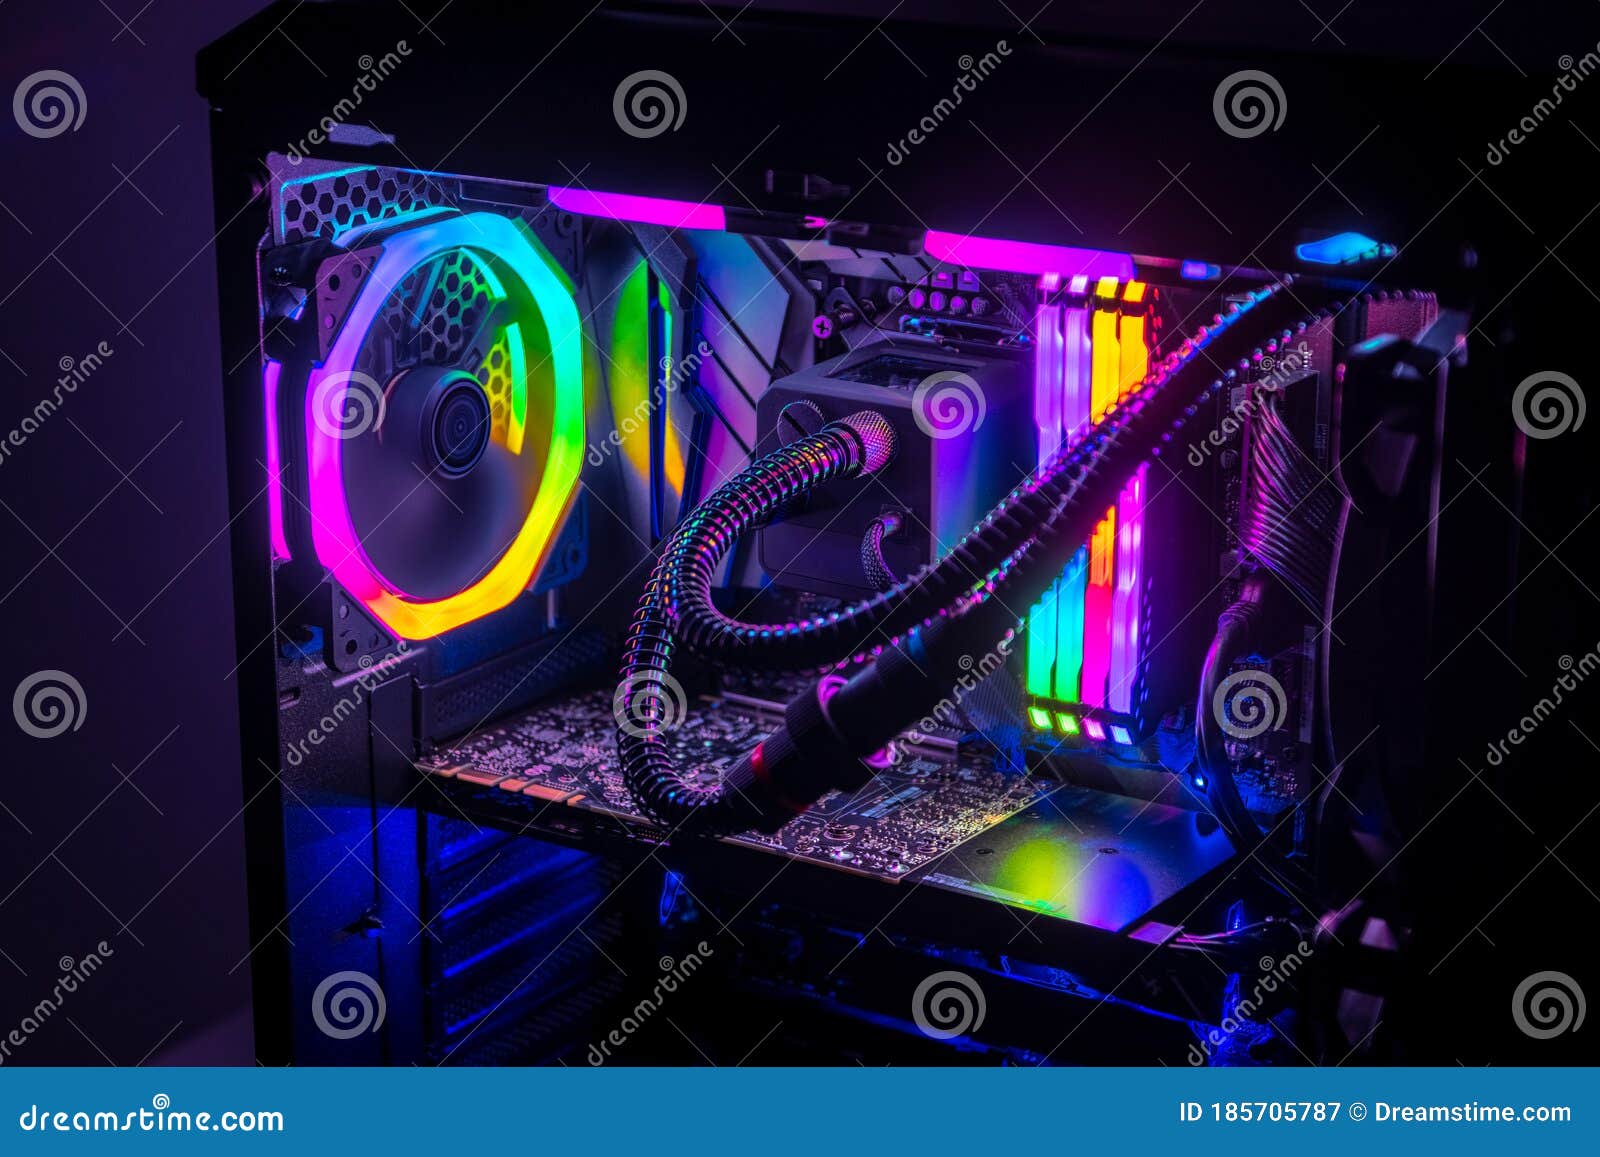 Gaming PC RGB LED Lights on a Computer, Assembled with Hardware Components Stock Image - Image of case: 185705787